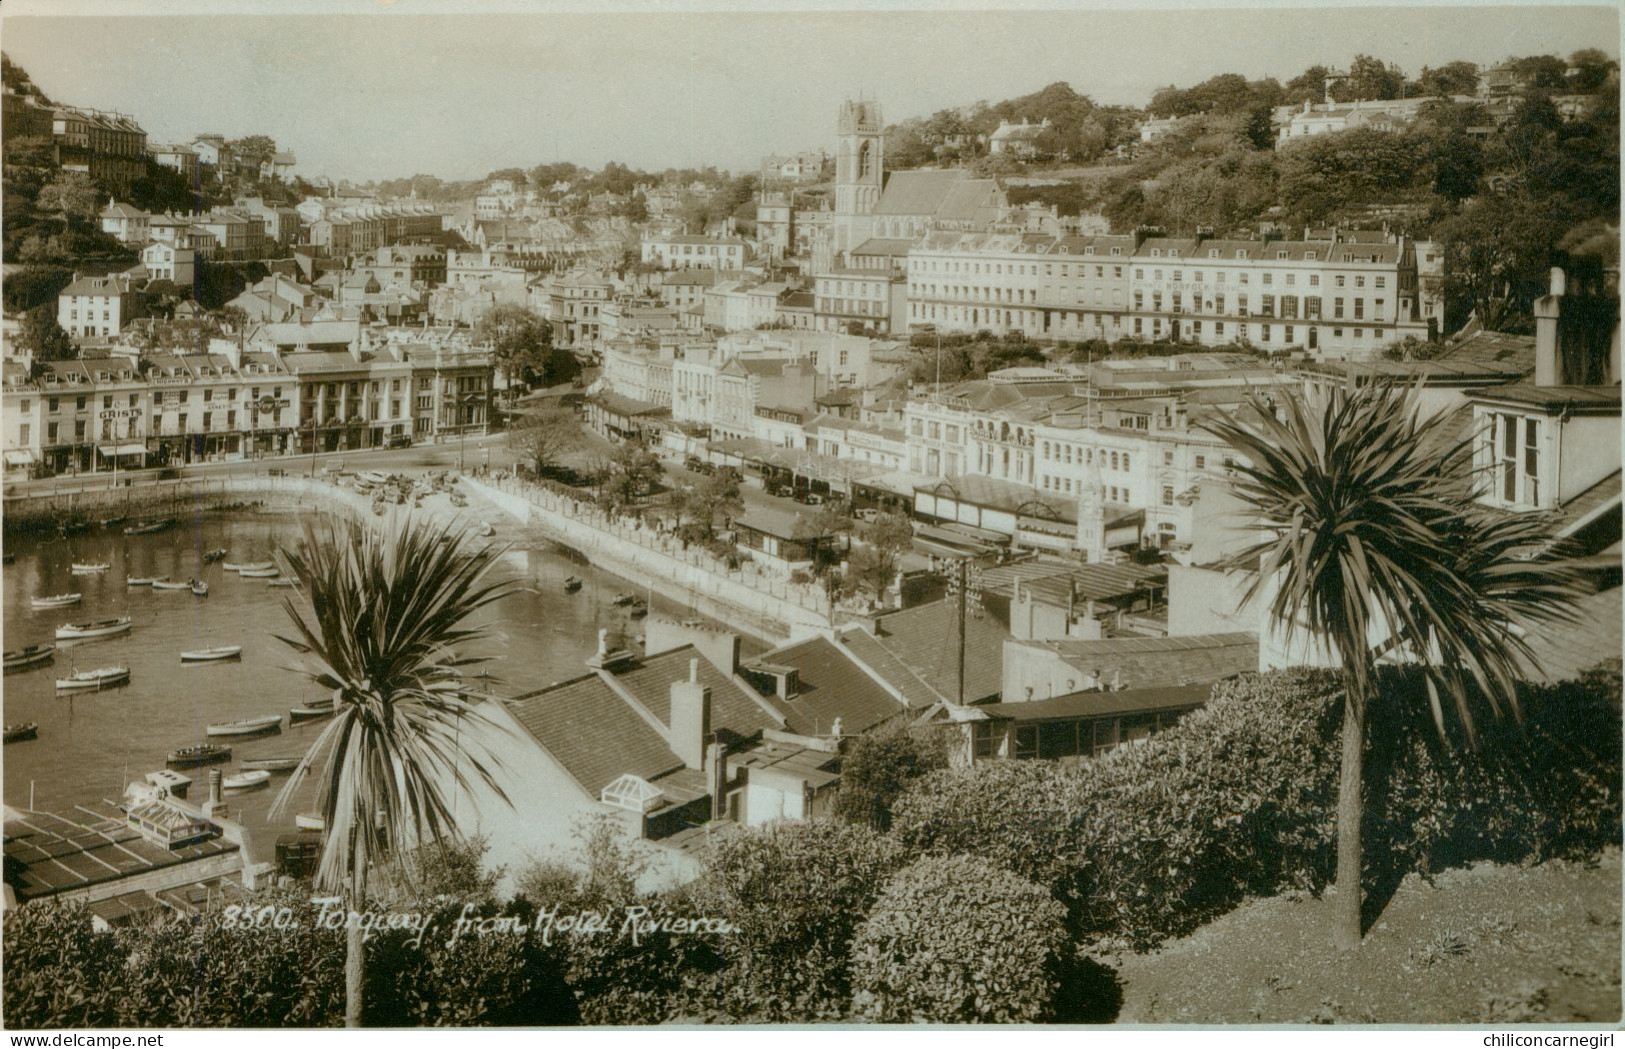 * Cp Photo - TORQUAY From Hotel Riviera - Harbour - 8500 - Edit. E.A. SWEETMAN & Son - SUNSHINE Series - 1936 - Torquay